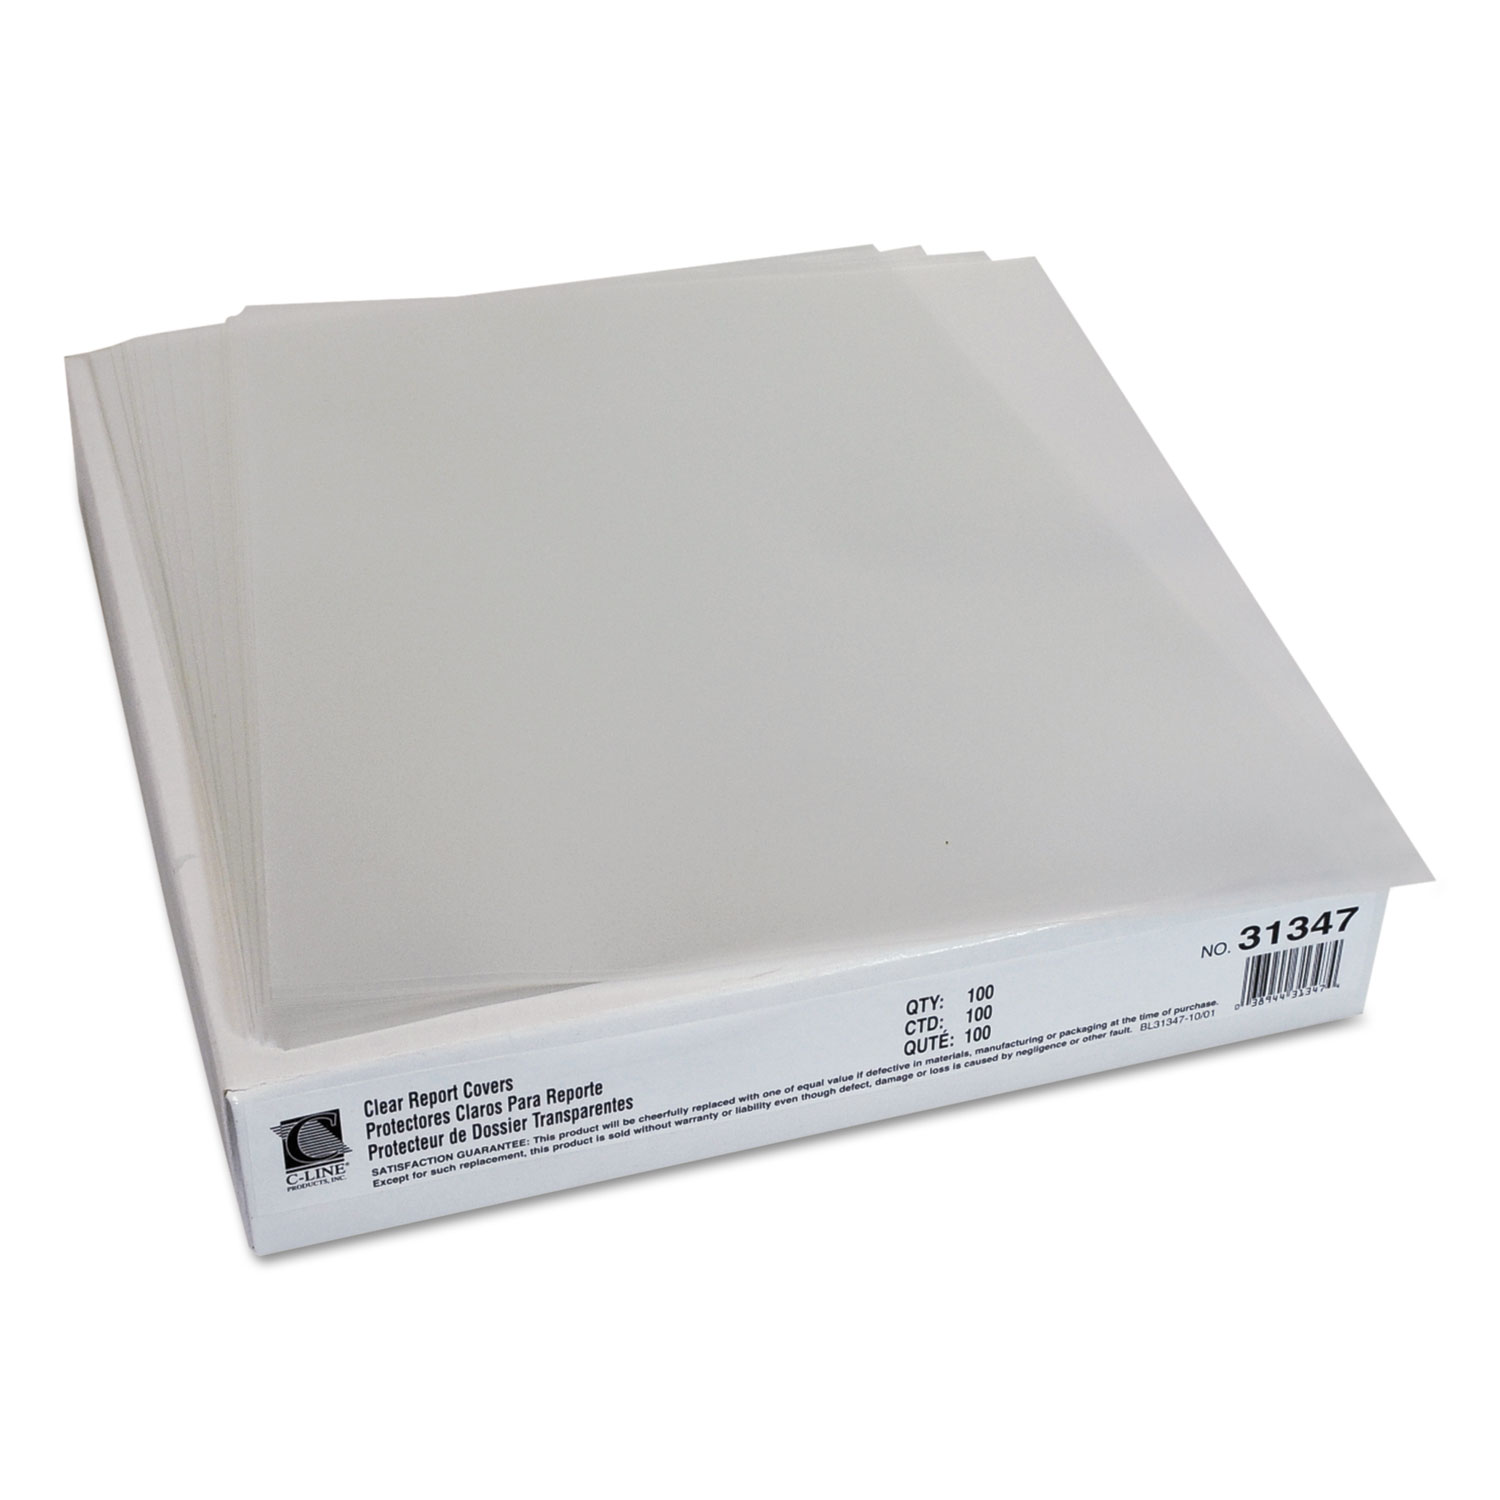 OfficeBox - Rexel 100 Clear Frosted Covers